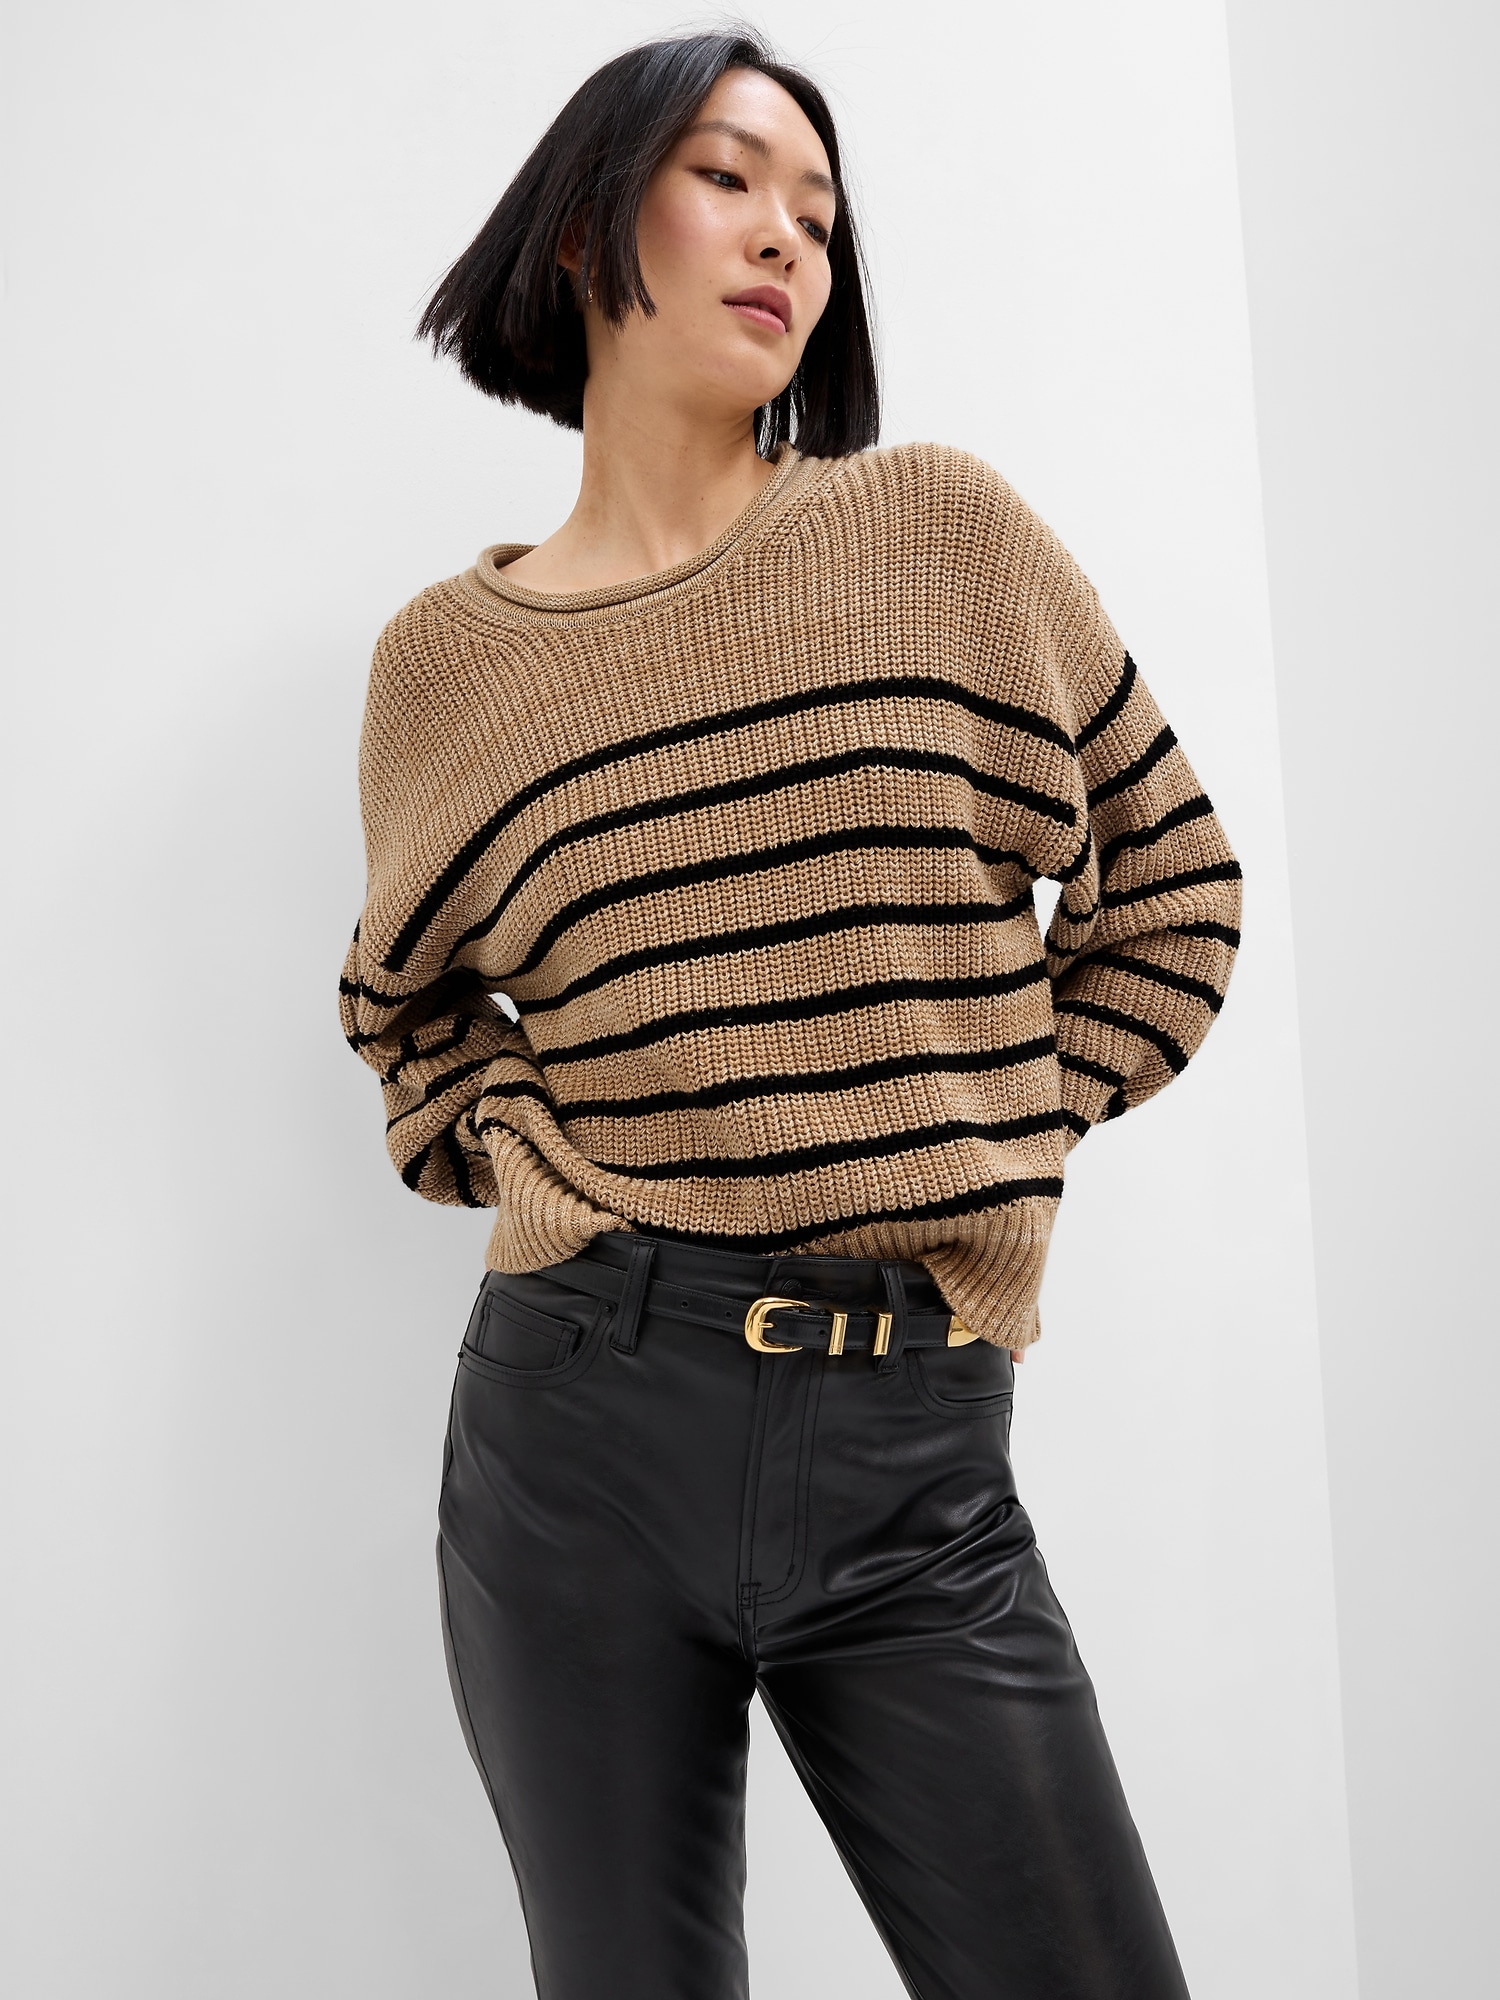 Relaxed Stripe Shaker-Stitch Sweater